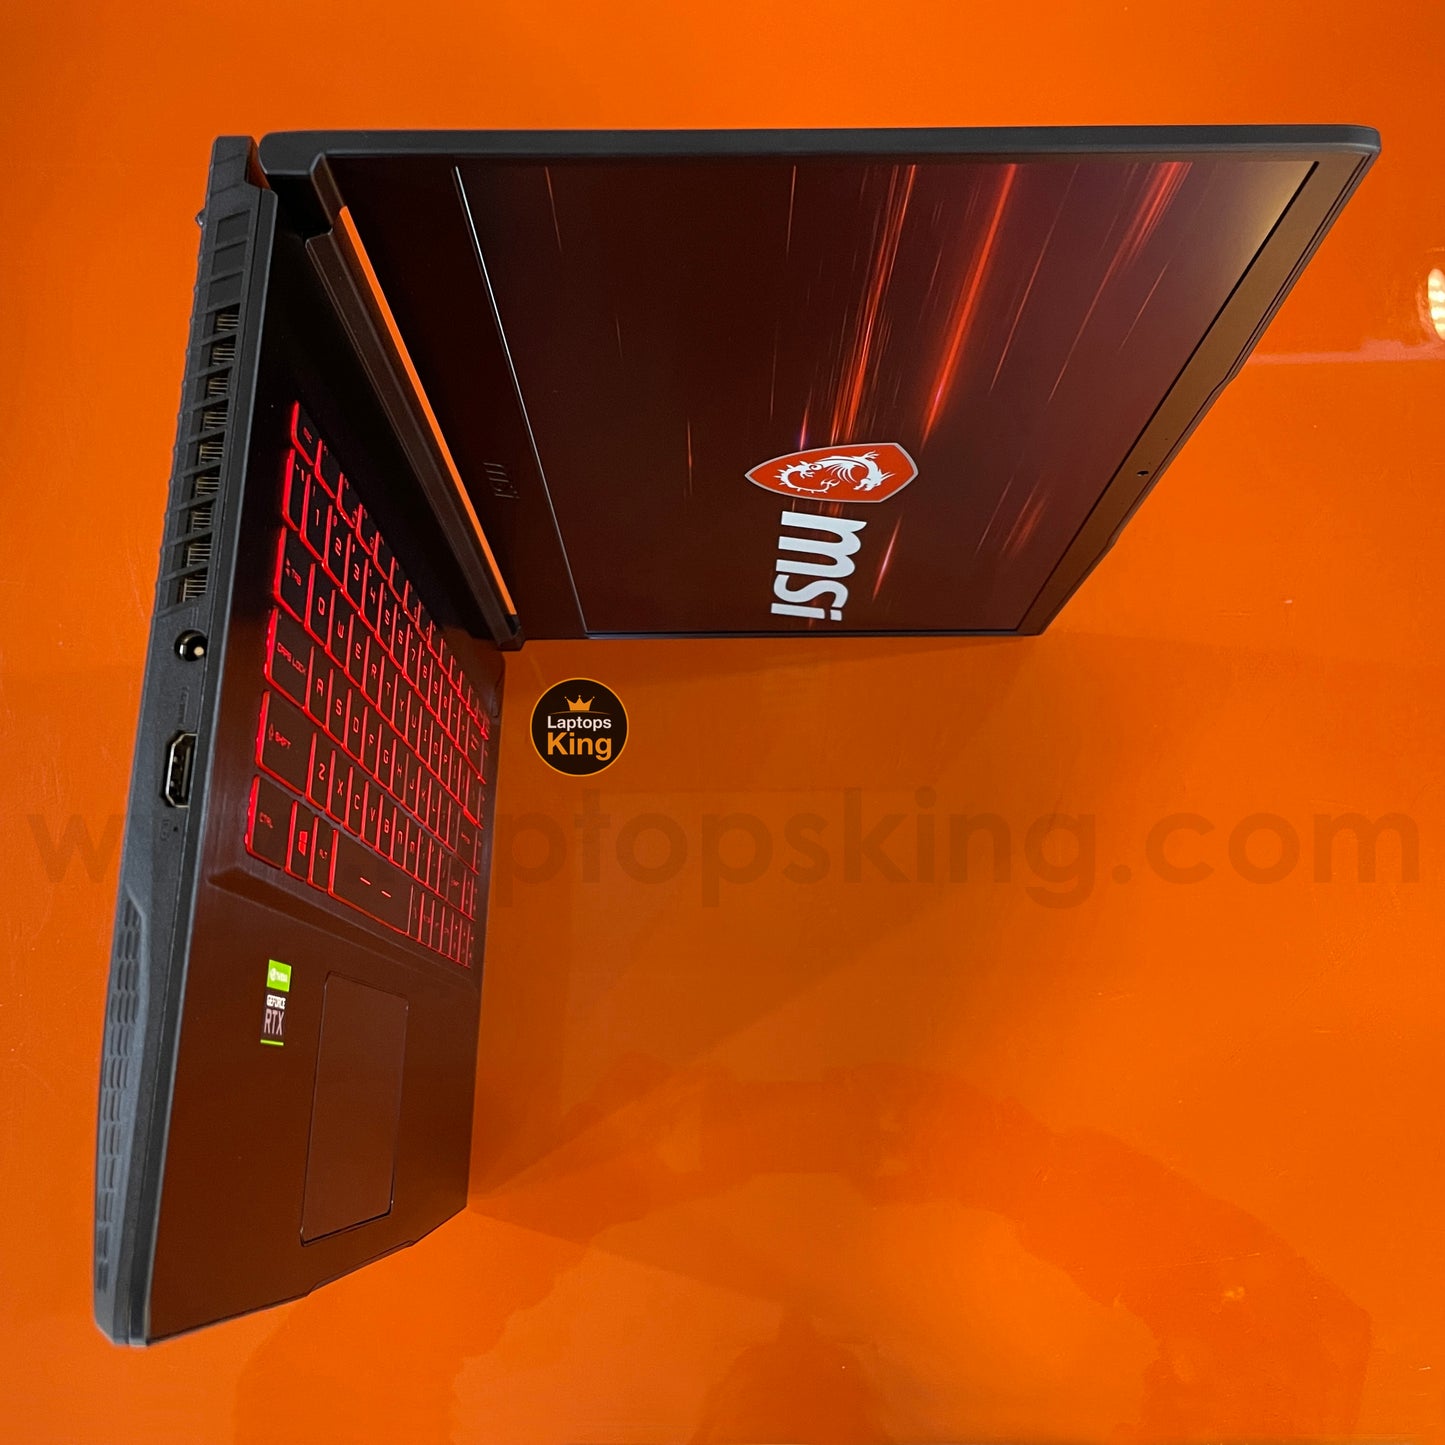 Msi GF65 Thin 10UE RTX 3060 144Hz Gaming Laptops (Brand New) Gaming laptop, Graphic Design laptop, best laptop for gaming, best laptop for graphic design, computer for sale Lebanon, laptop for video editing in Lebanon, laptop for sale Lebanon, best graphic design laptop,	best video editing laptop, best programming laptop, laptop for sale in Lebanon, laptops for sale in Lebanon, laptop for sale in Lebanon, buy computer Lebanon, buy laptop Lebanon.